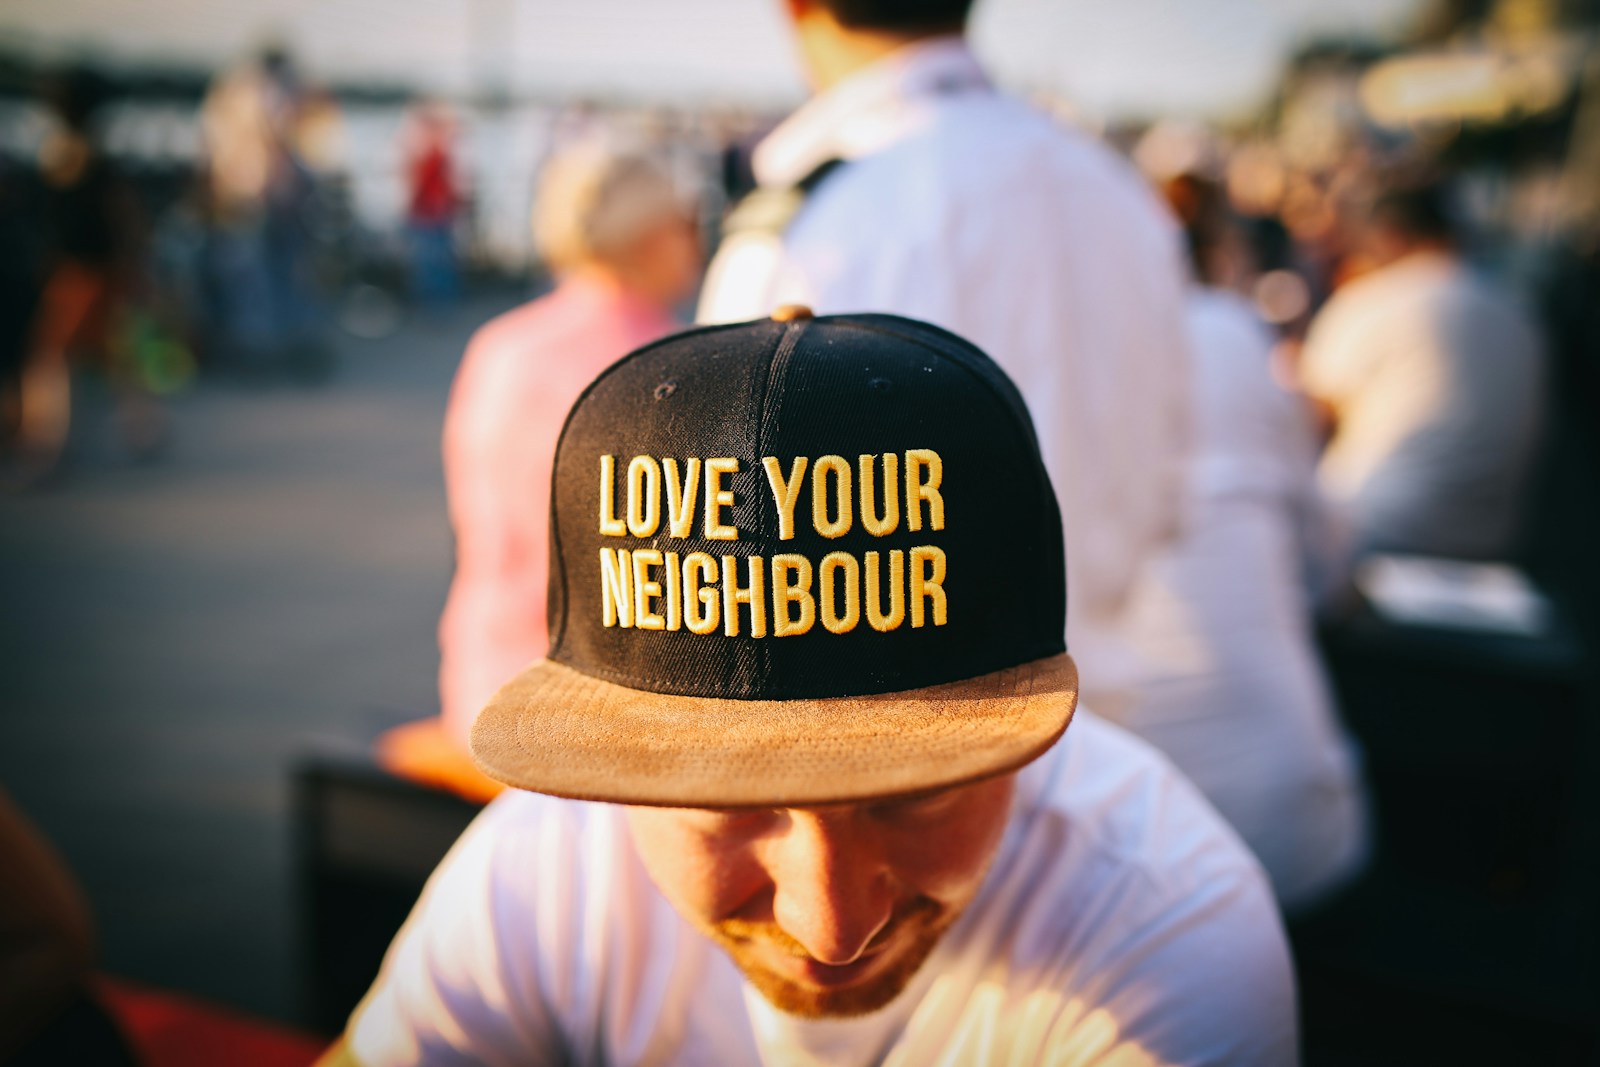 man wearing black cap with love your neighbor print during daytime